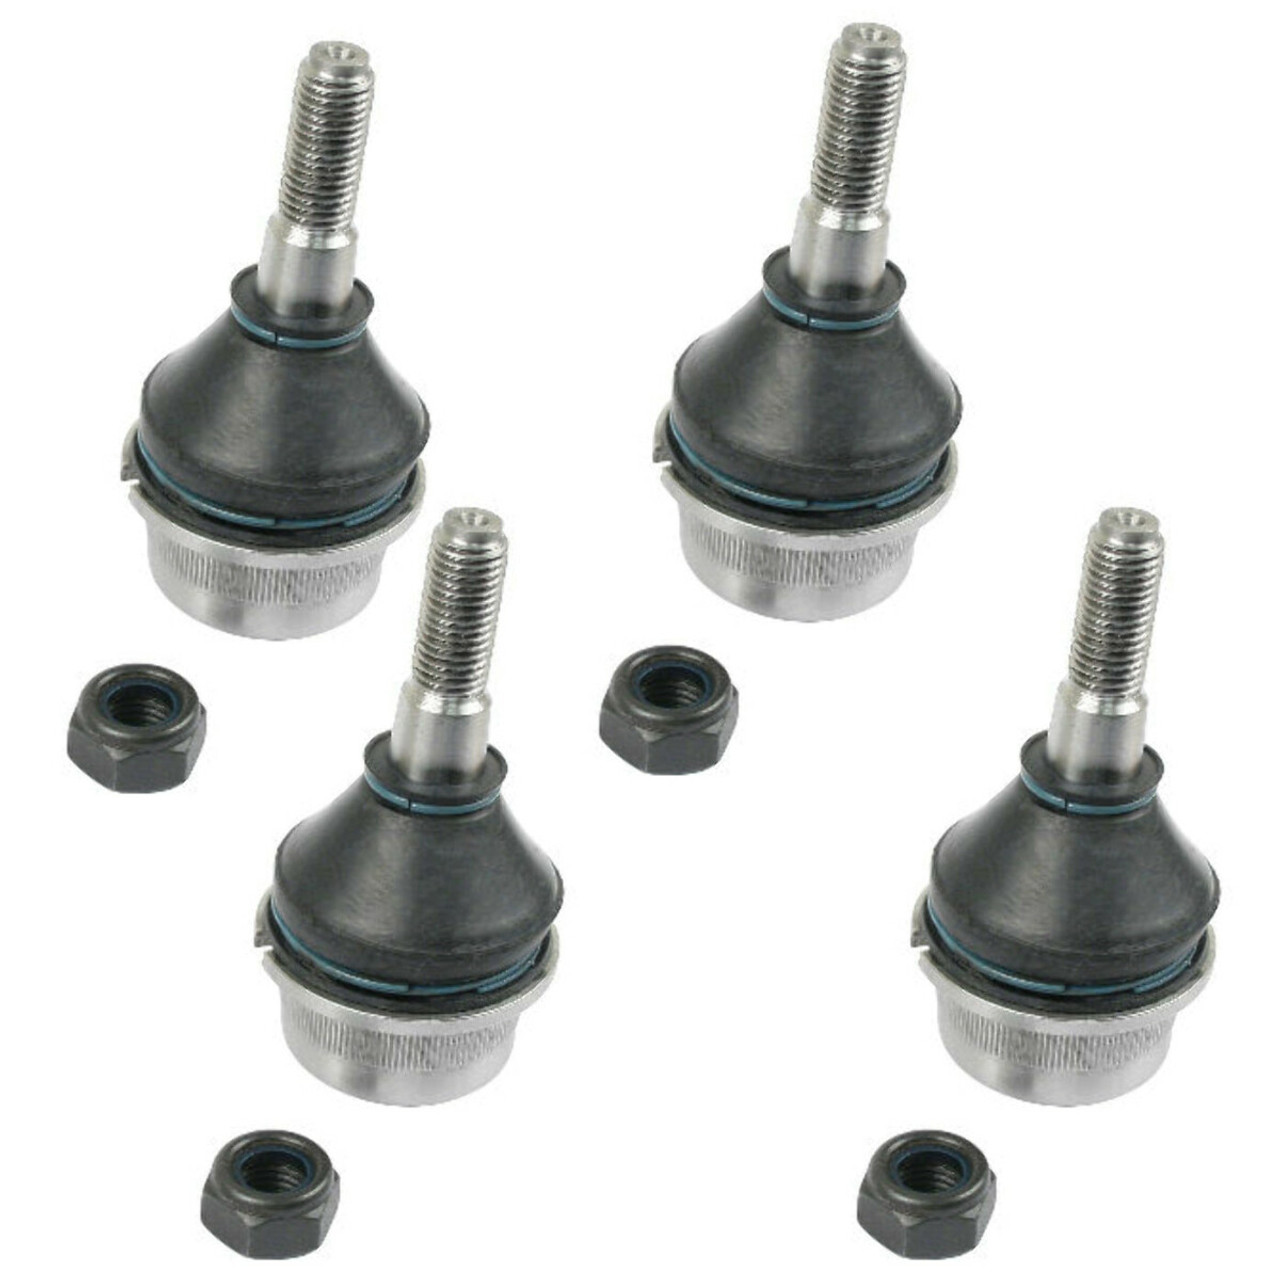 4-Piece Ball Joint Kit for Front Suspension Compatible with VW Beetle/Ghia 66-77